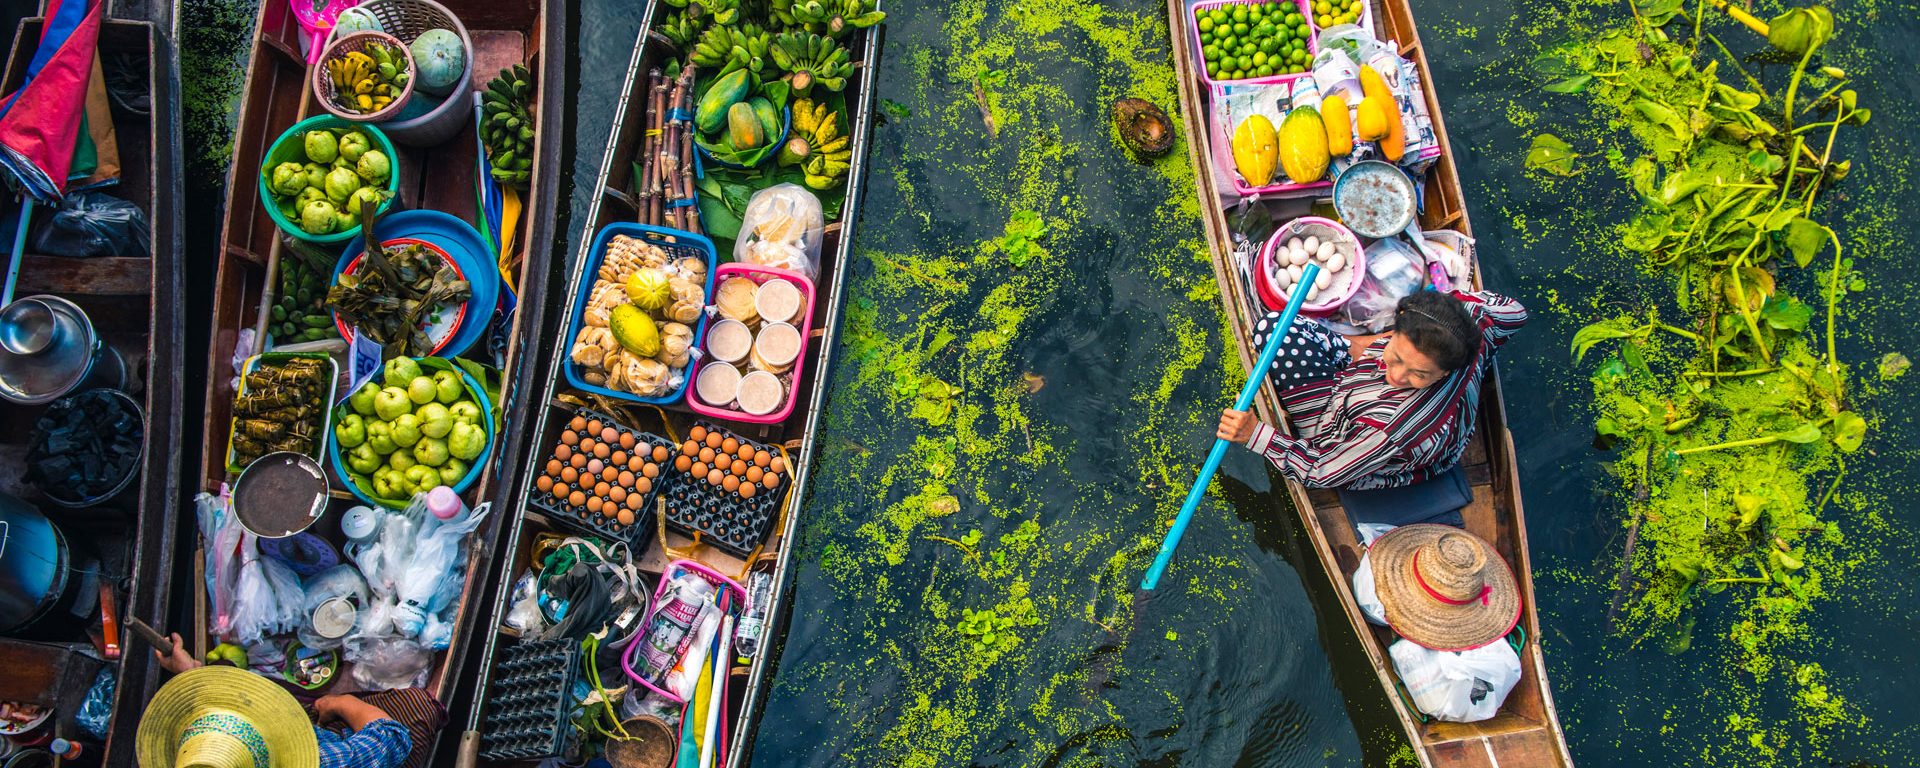 Female vendor sells food from a longtail boat at a floating market in Bangkok, Thailand